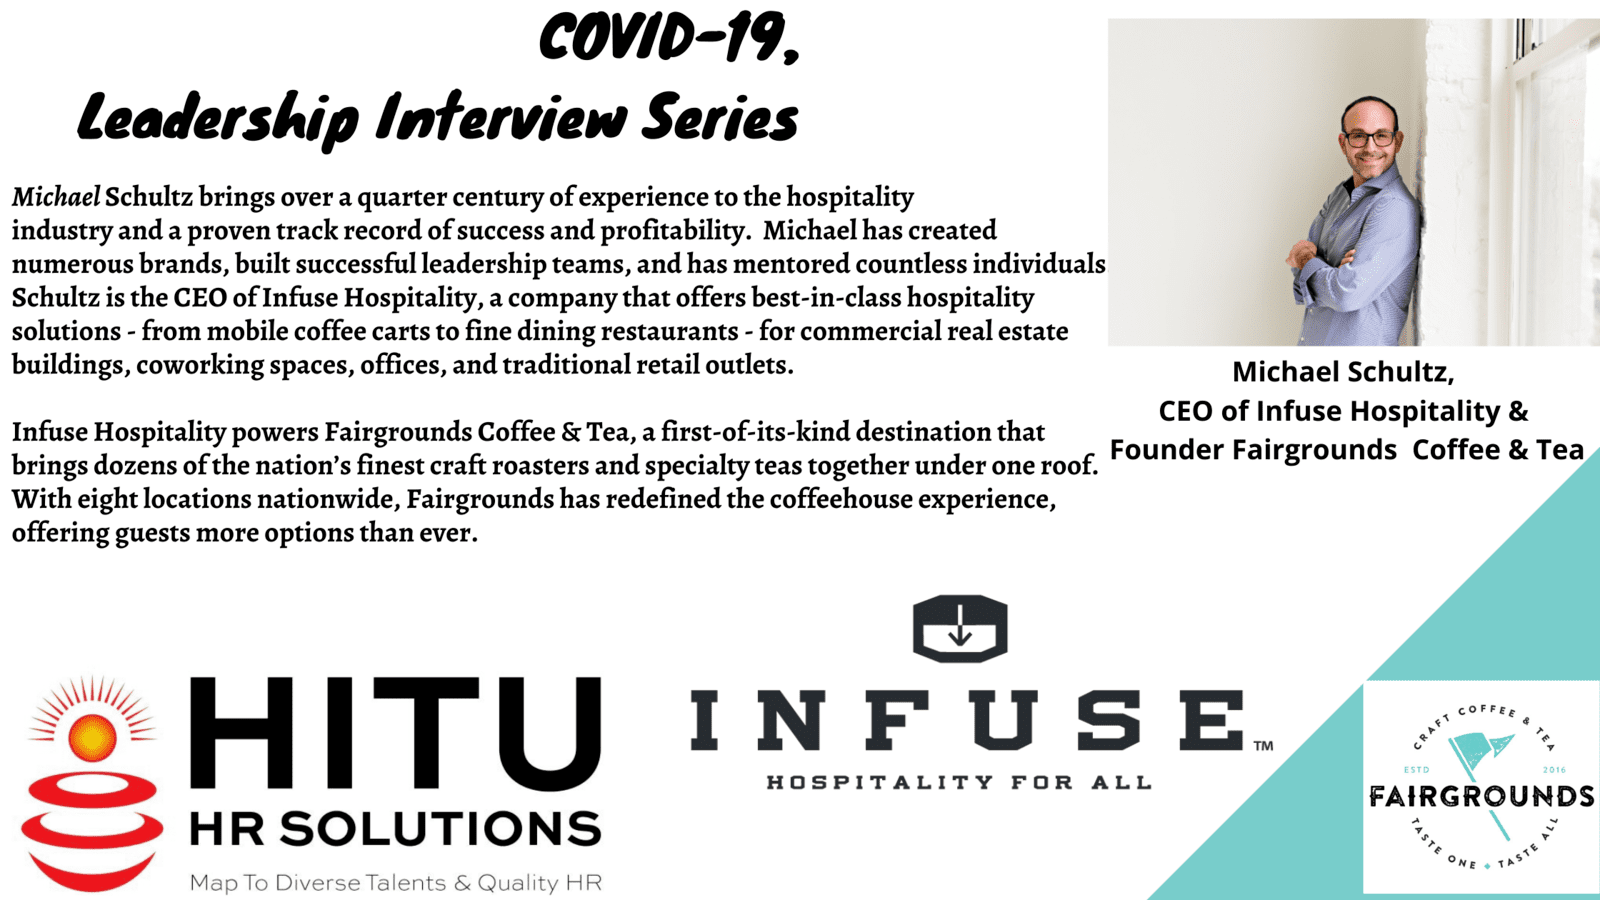 COVID-19 Leadership Interview Series: Michael Schultz CEO & Founder Infuse Hospitality Fairgrounds Tea & Coffee